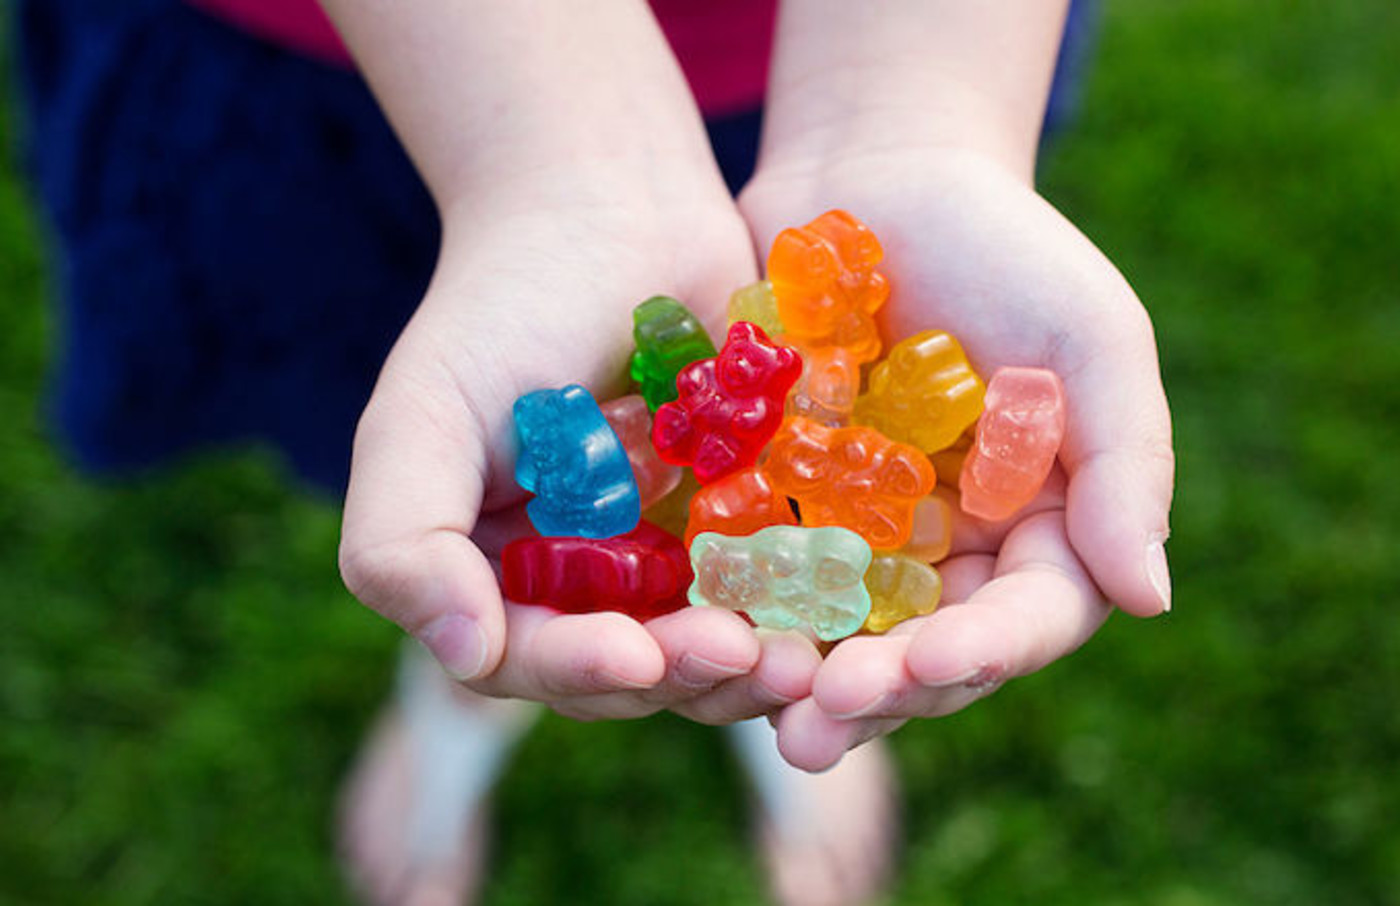 Weed Gummy Bears And Other Fun Edible Shapes Are Now Illegal In